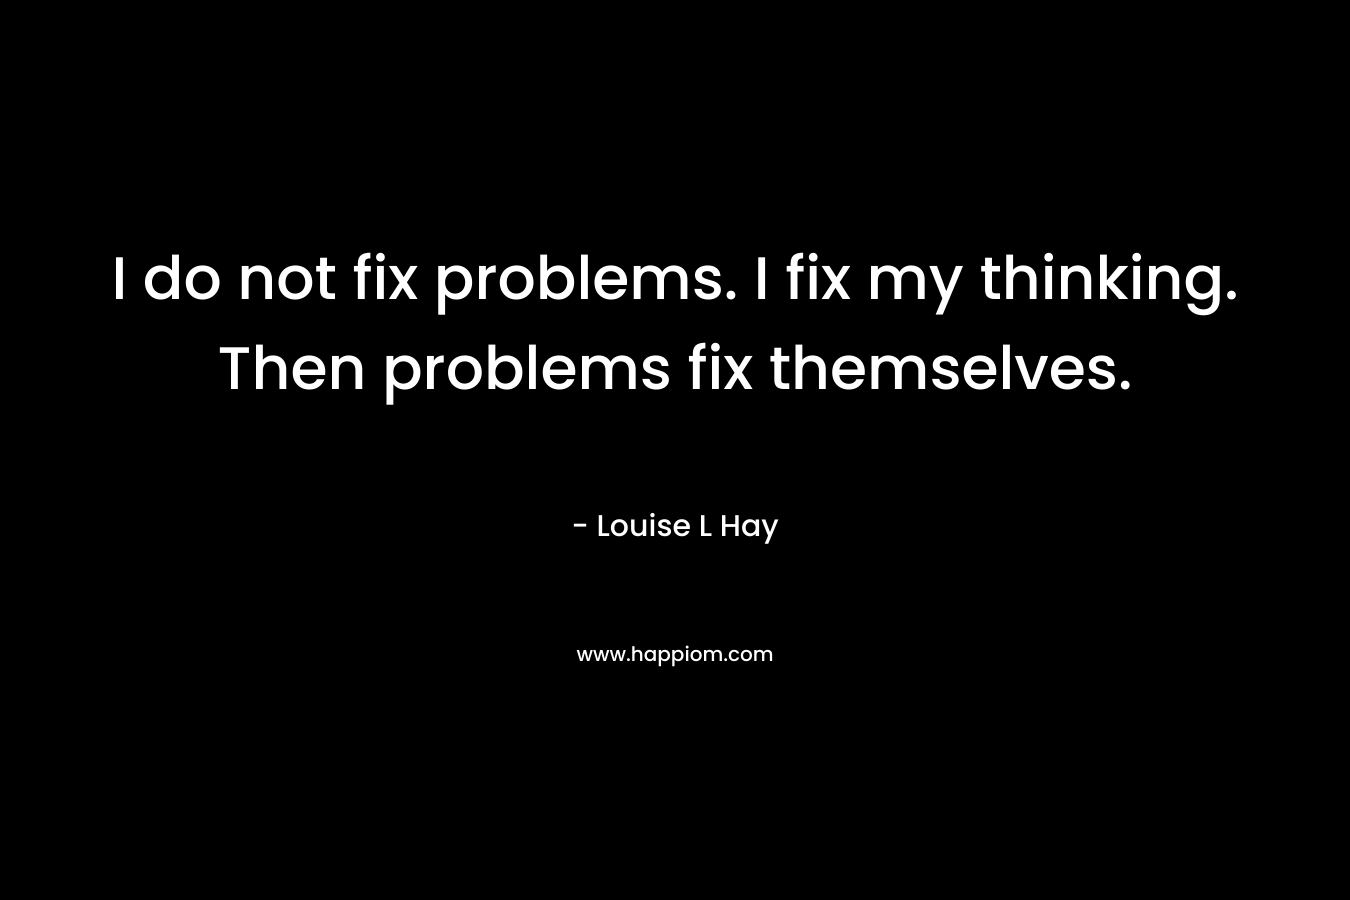 I do not fix problems. I fix my thinking. Then problems fix themselves.